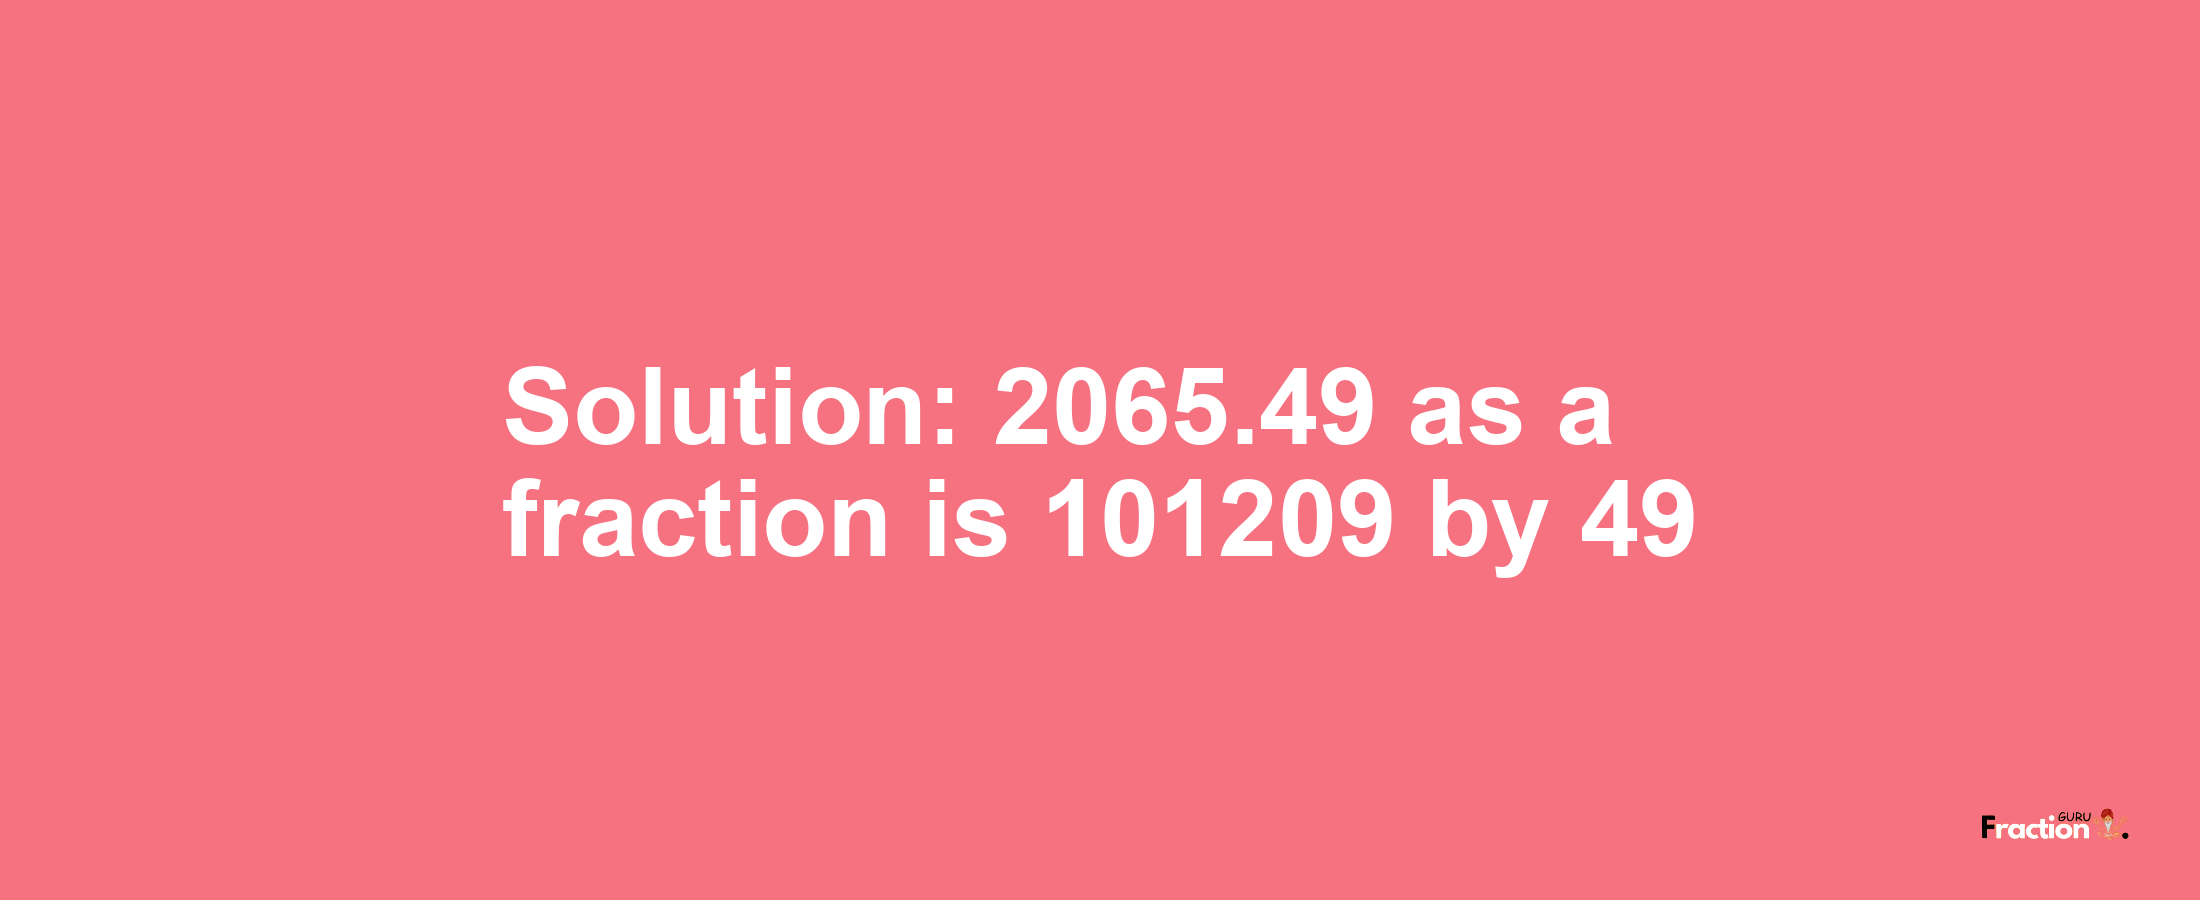 Solution:2065.49 as a fraction is 101209/49